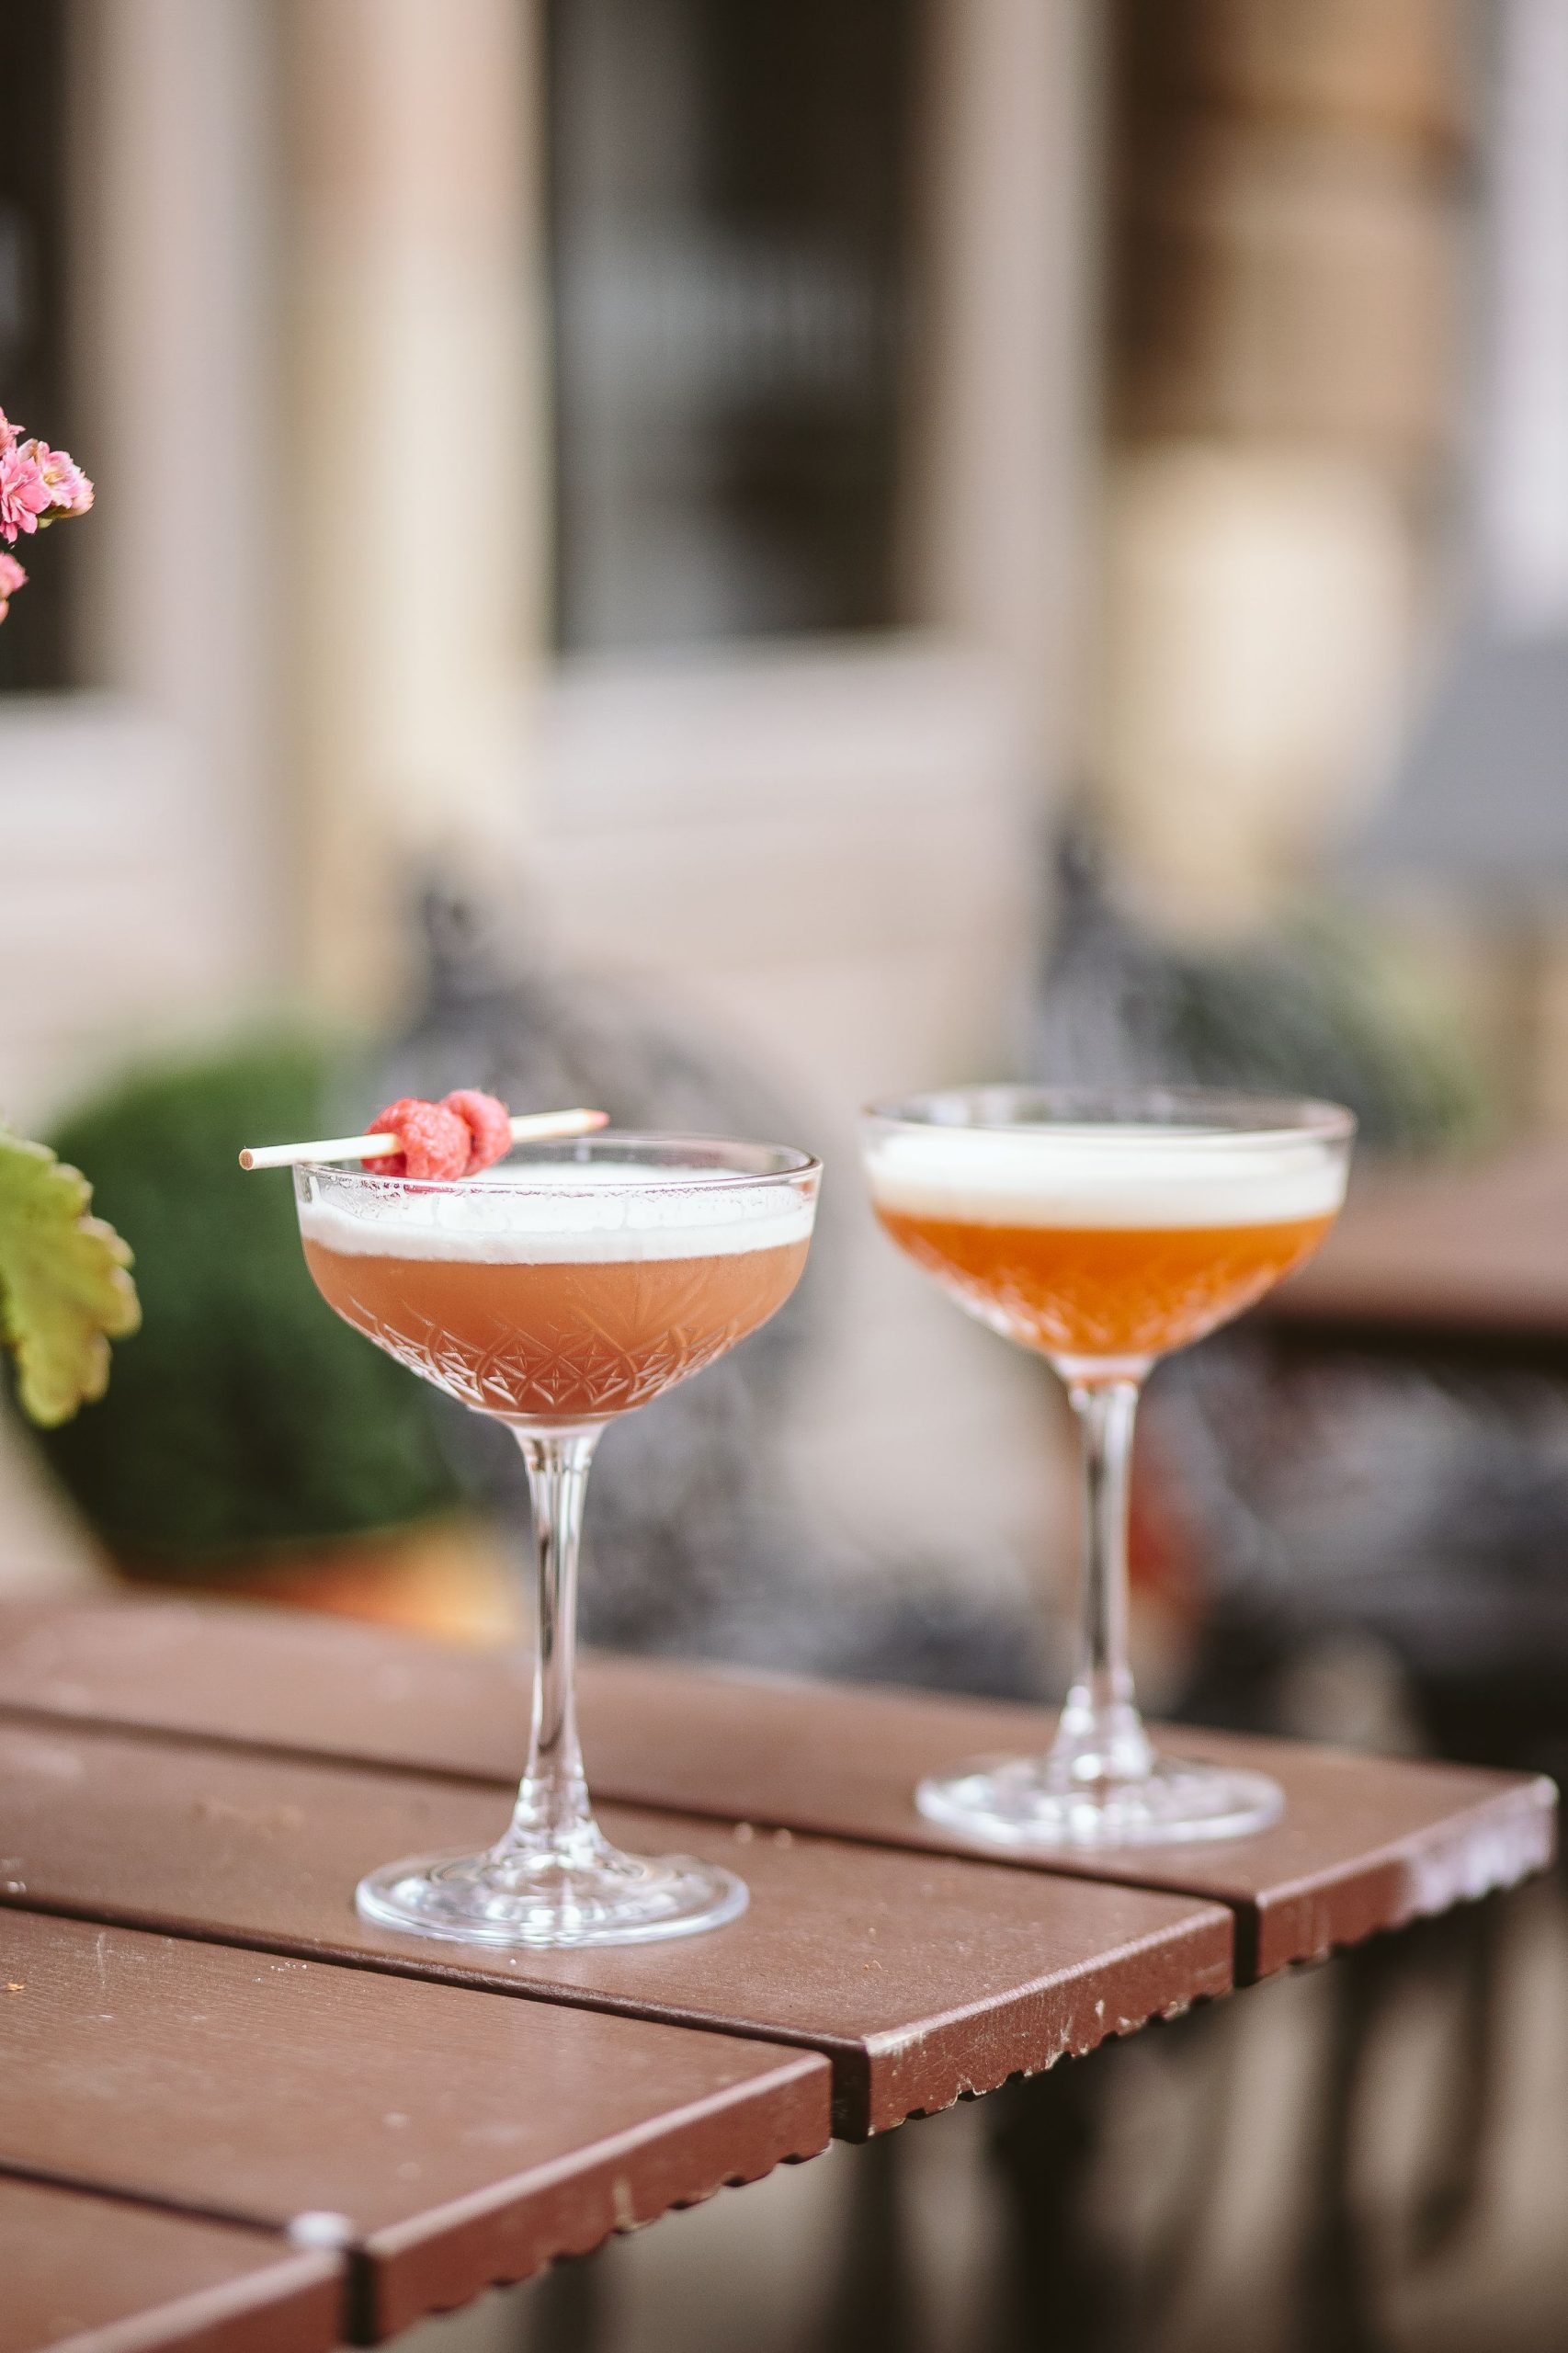 Two cocktails, pink and orange in coupe glasses outside on a wooden table